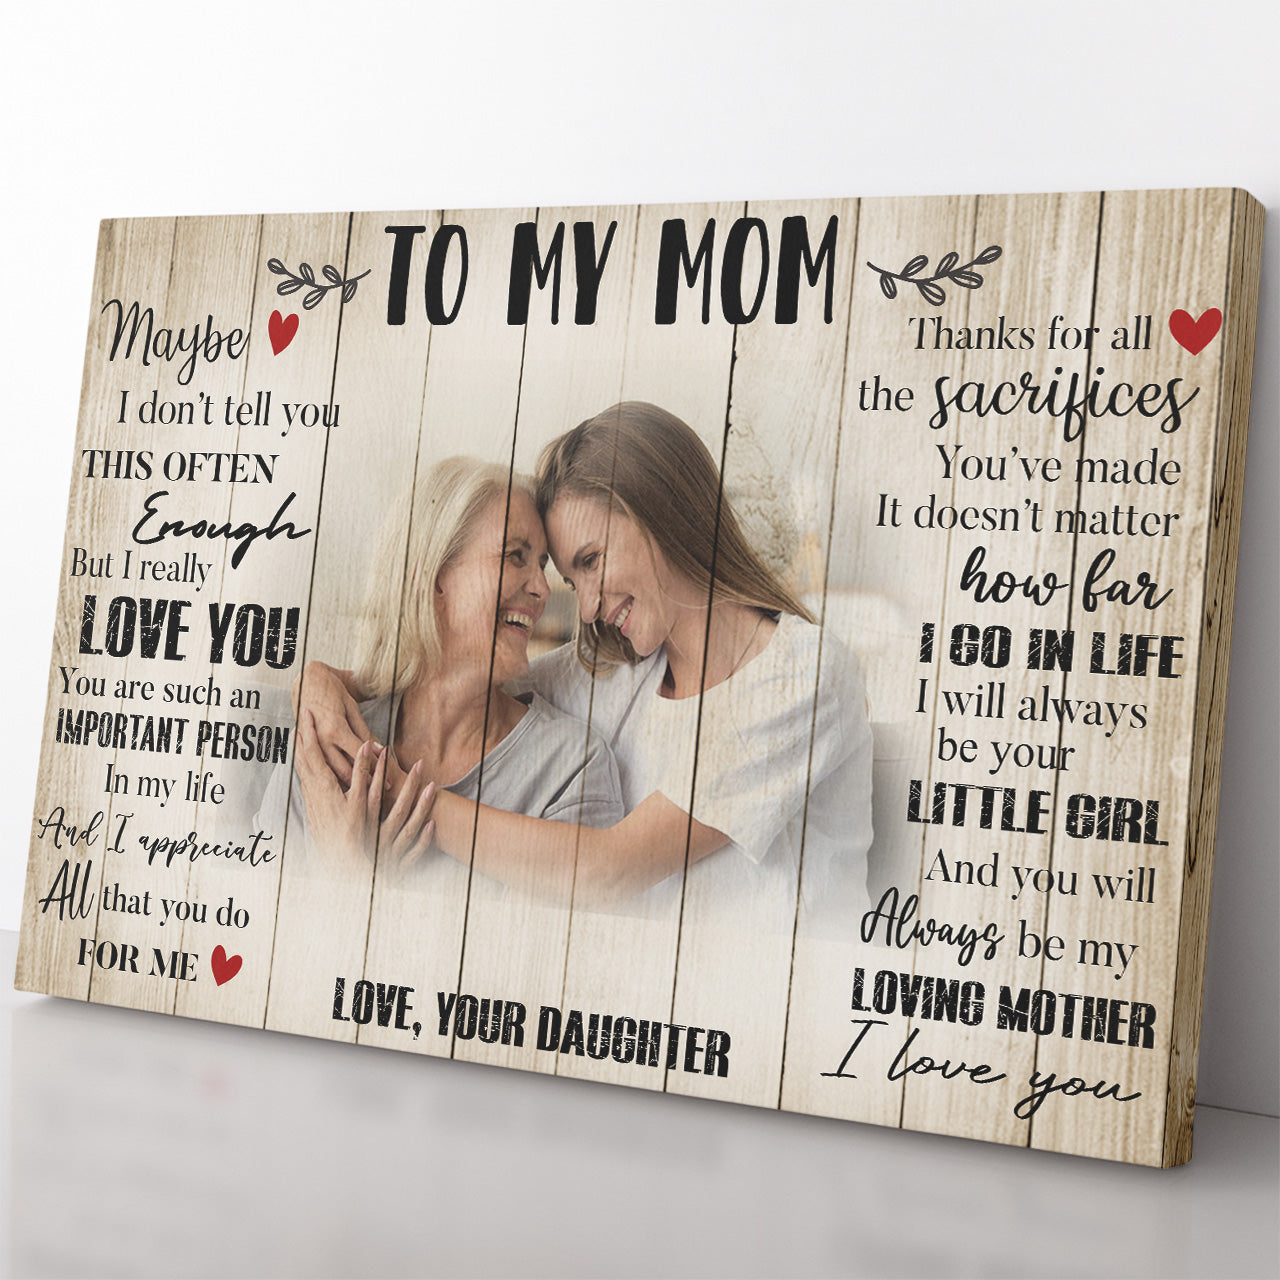 Personalized Canvas Mothers Day Gift For Mom, Maybe I Don't Tell You This Often Enough Canvas